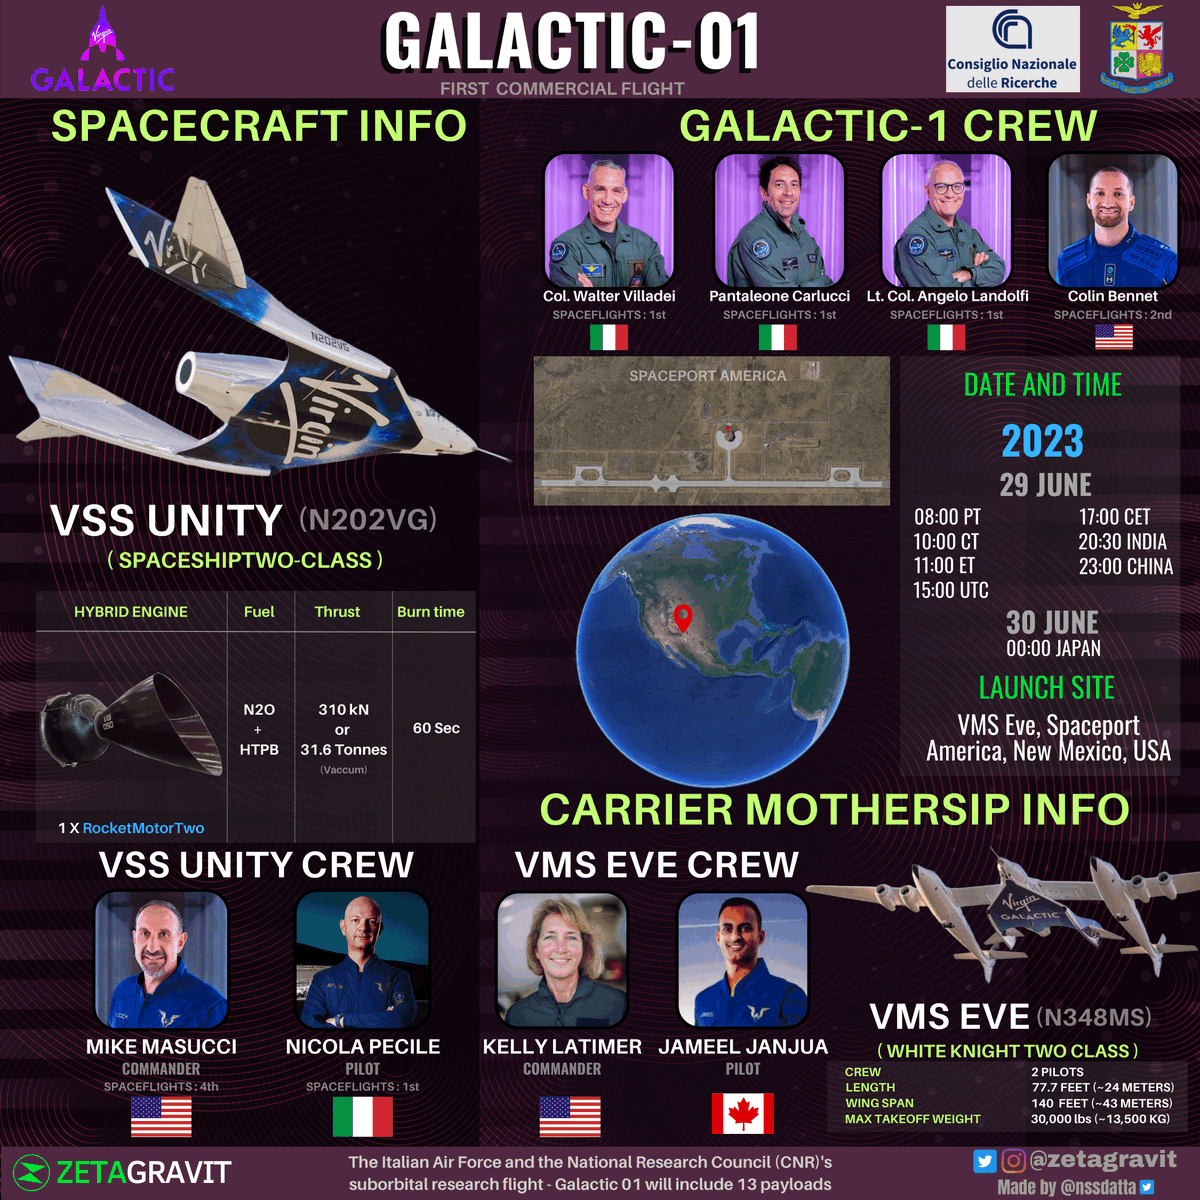 Launch Update 📢 from #VirginGalactic 

4 Crew from the @ItalianAirForce & @CNRsocial will take off to conduct more than a dozen experiments in space.

The launch is on June-29  20:30 IST / 15:00 UTC from Spaceport America, USA.

Follow @zetagravit

#Galactic01 #virgin #Unity23